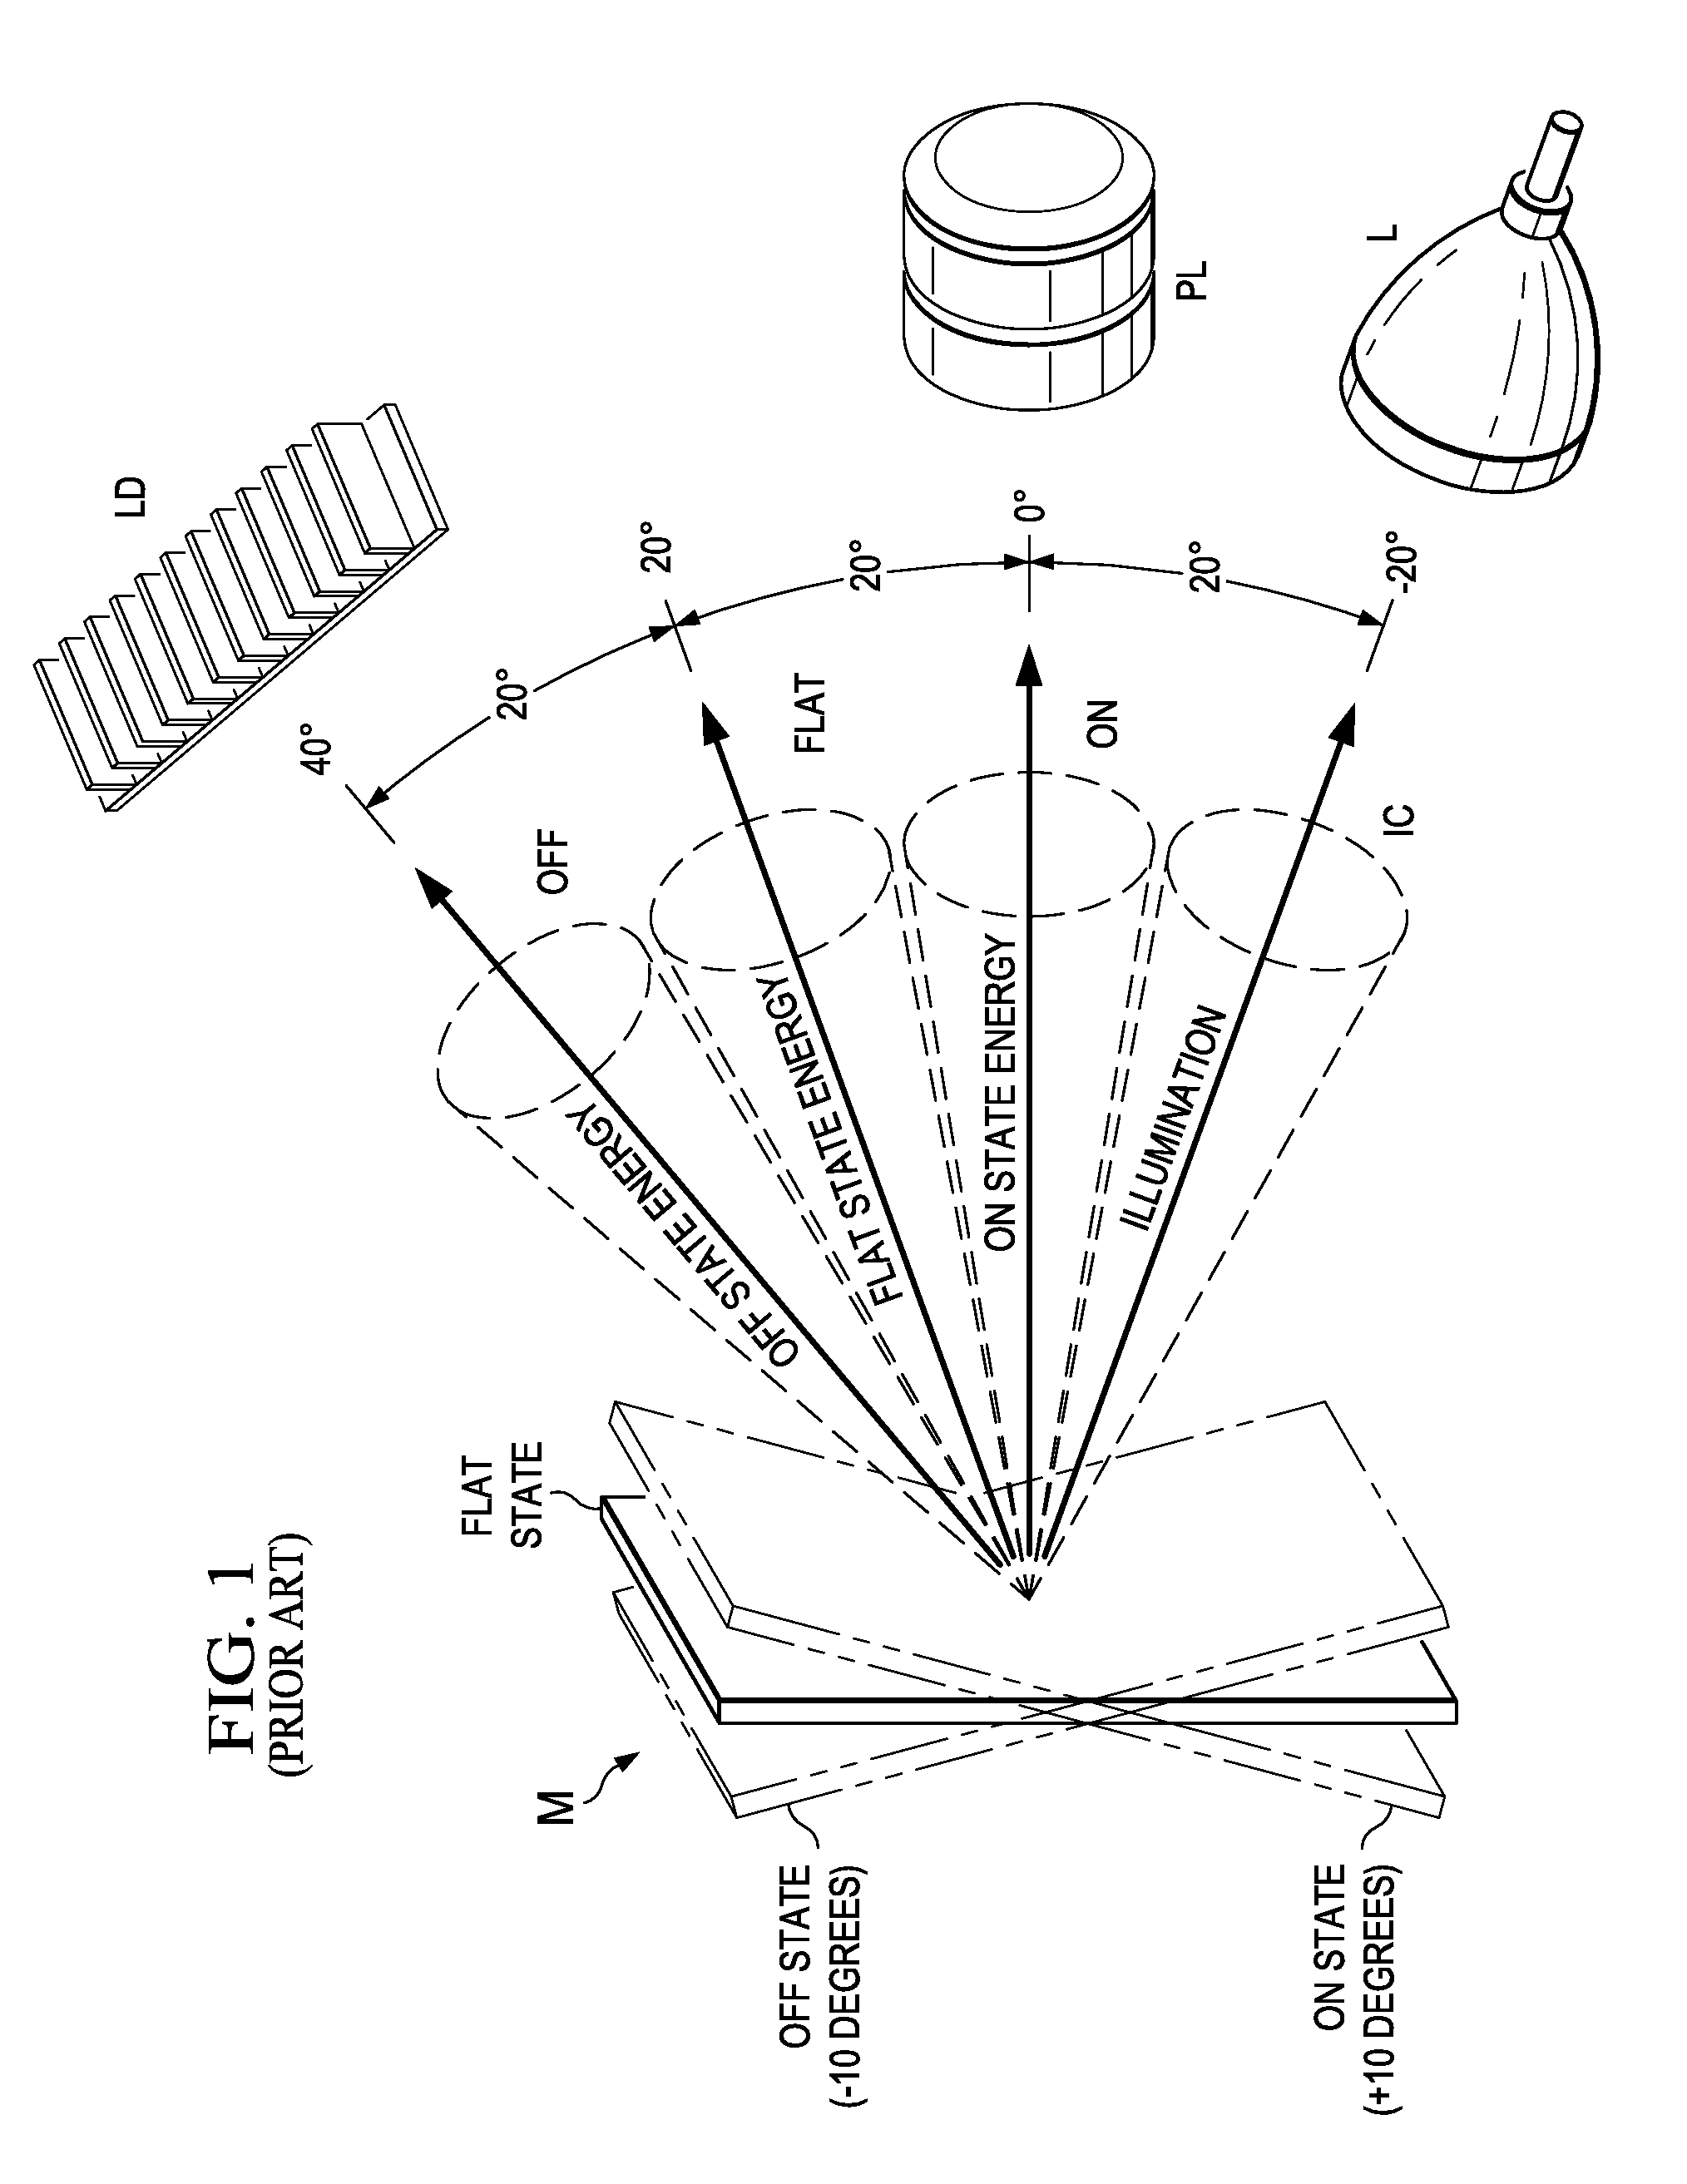 Light Recycling in a Micromirror-Based Projection Display System